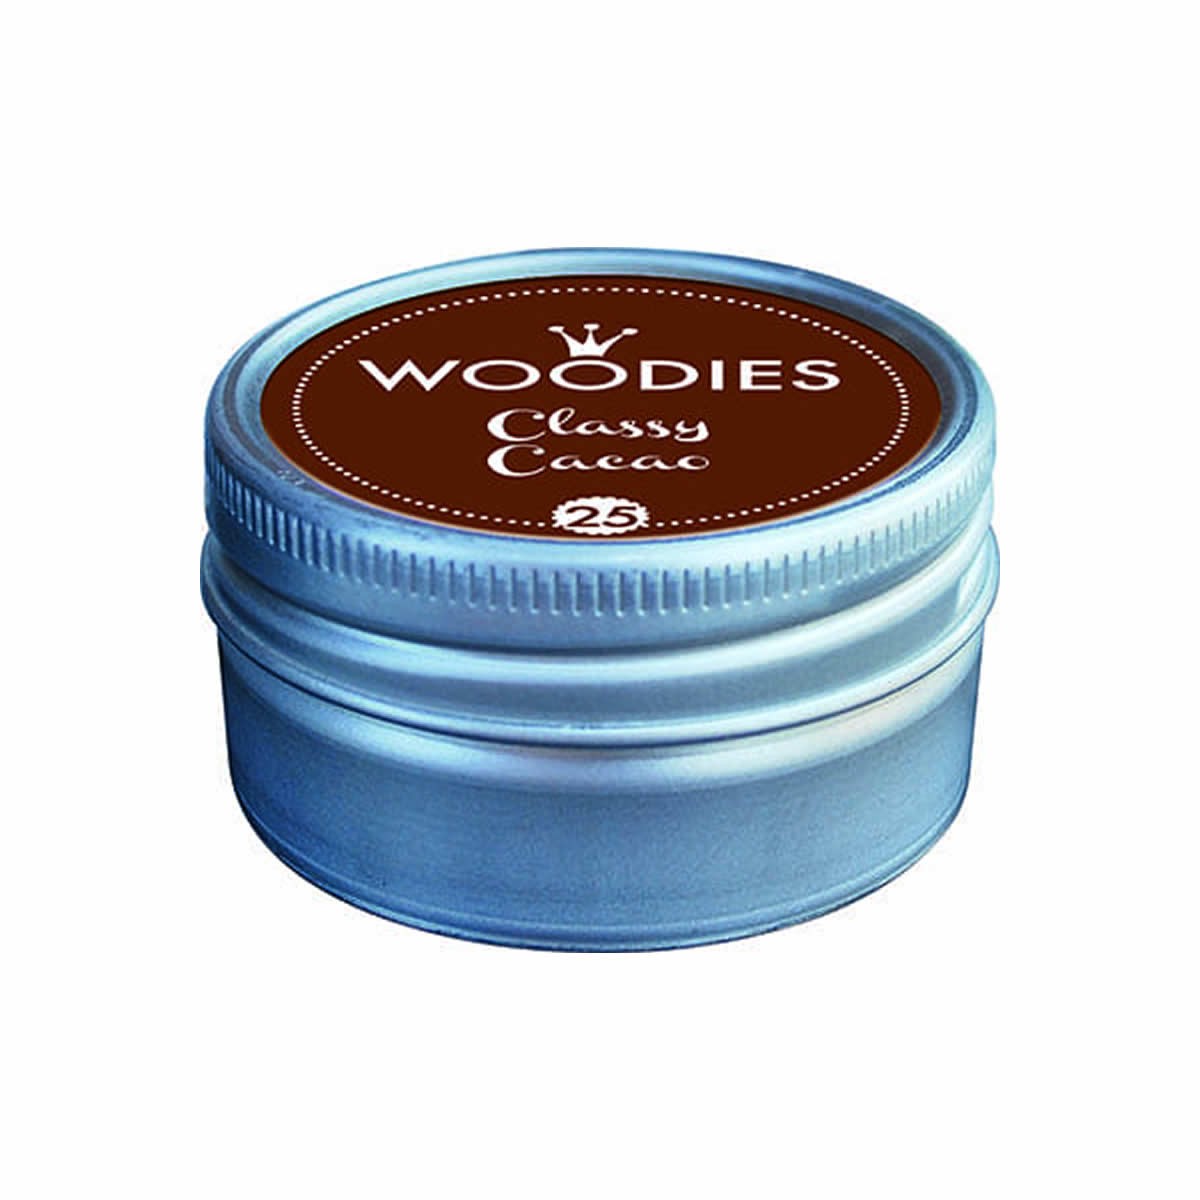 COLOP Arts & Crafts Woodies Ταμπόν Σφραγίδας Classy Cacao